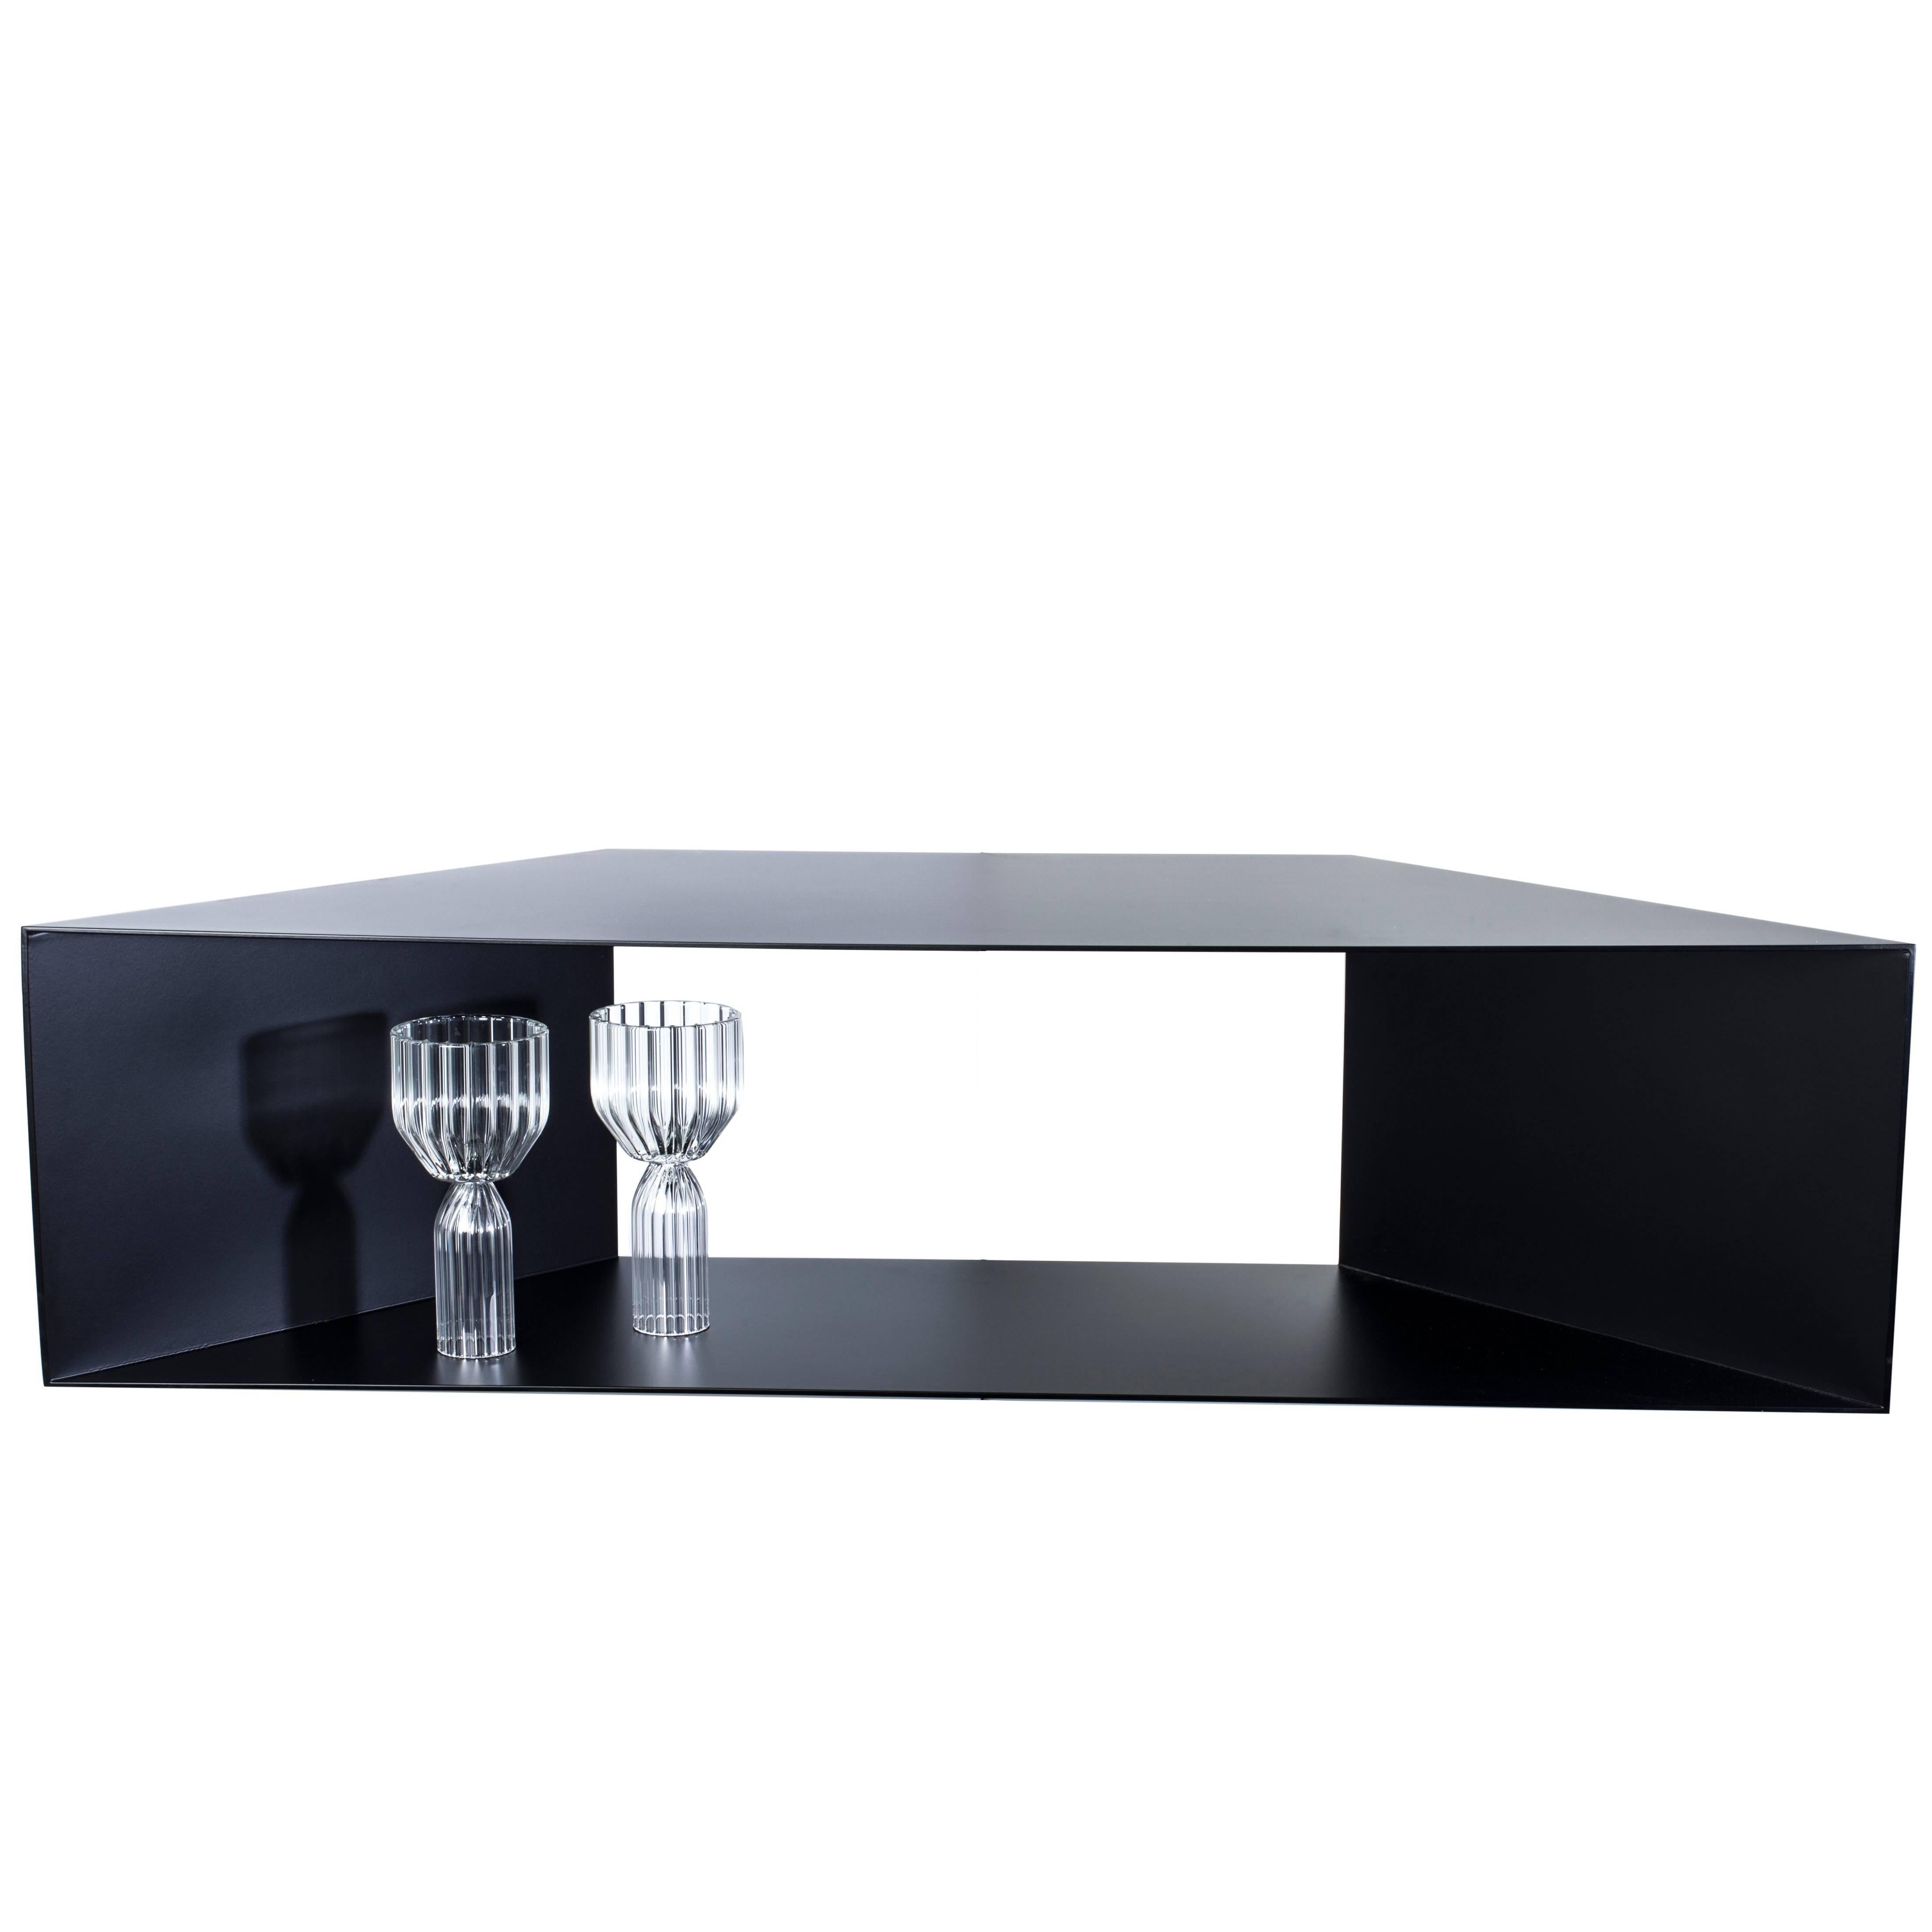 This contemporary sculptural single metal minimal corner shelf is perfect for any space be it a living room, office, or bathroom.

In stock: These Minimalist shelves, whether installed individually or in a series, occupy a space in a room often